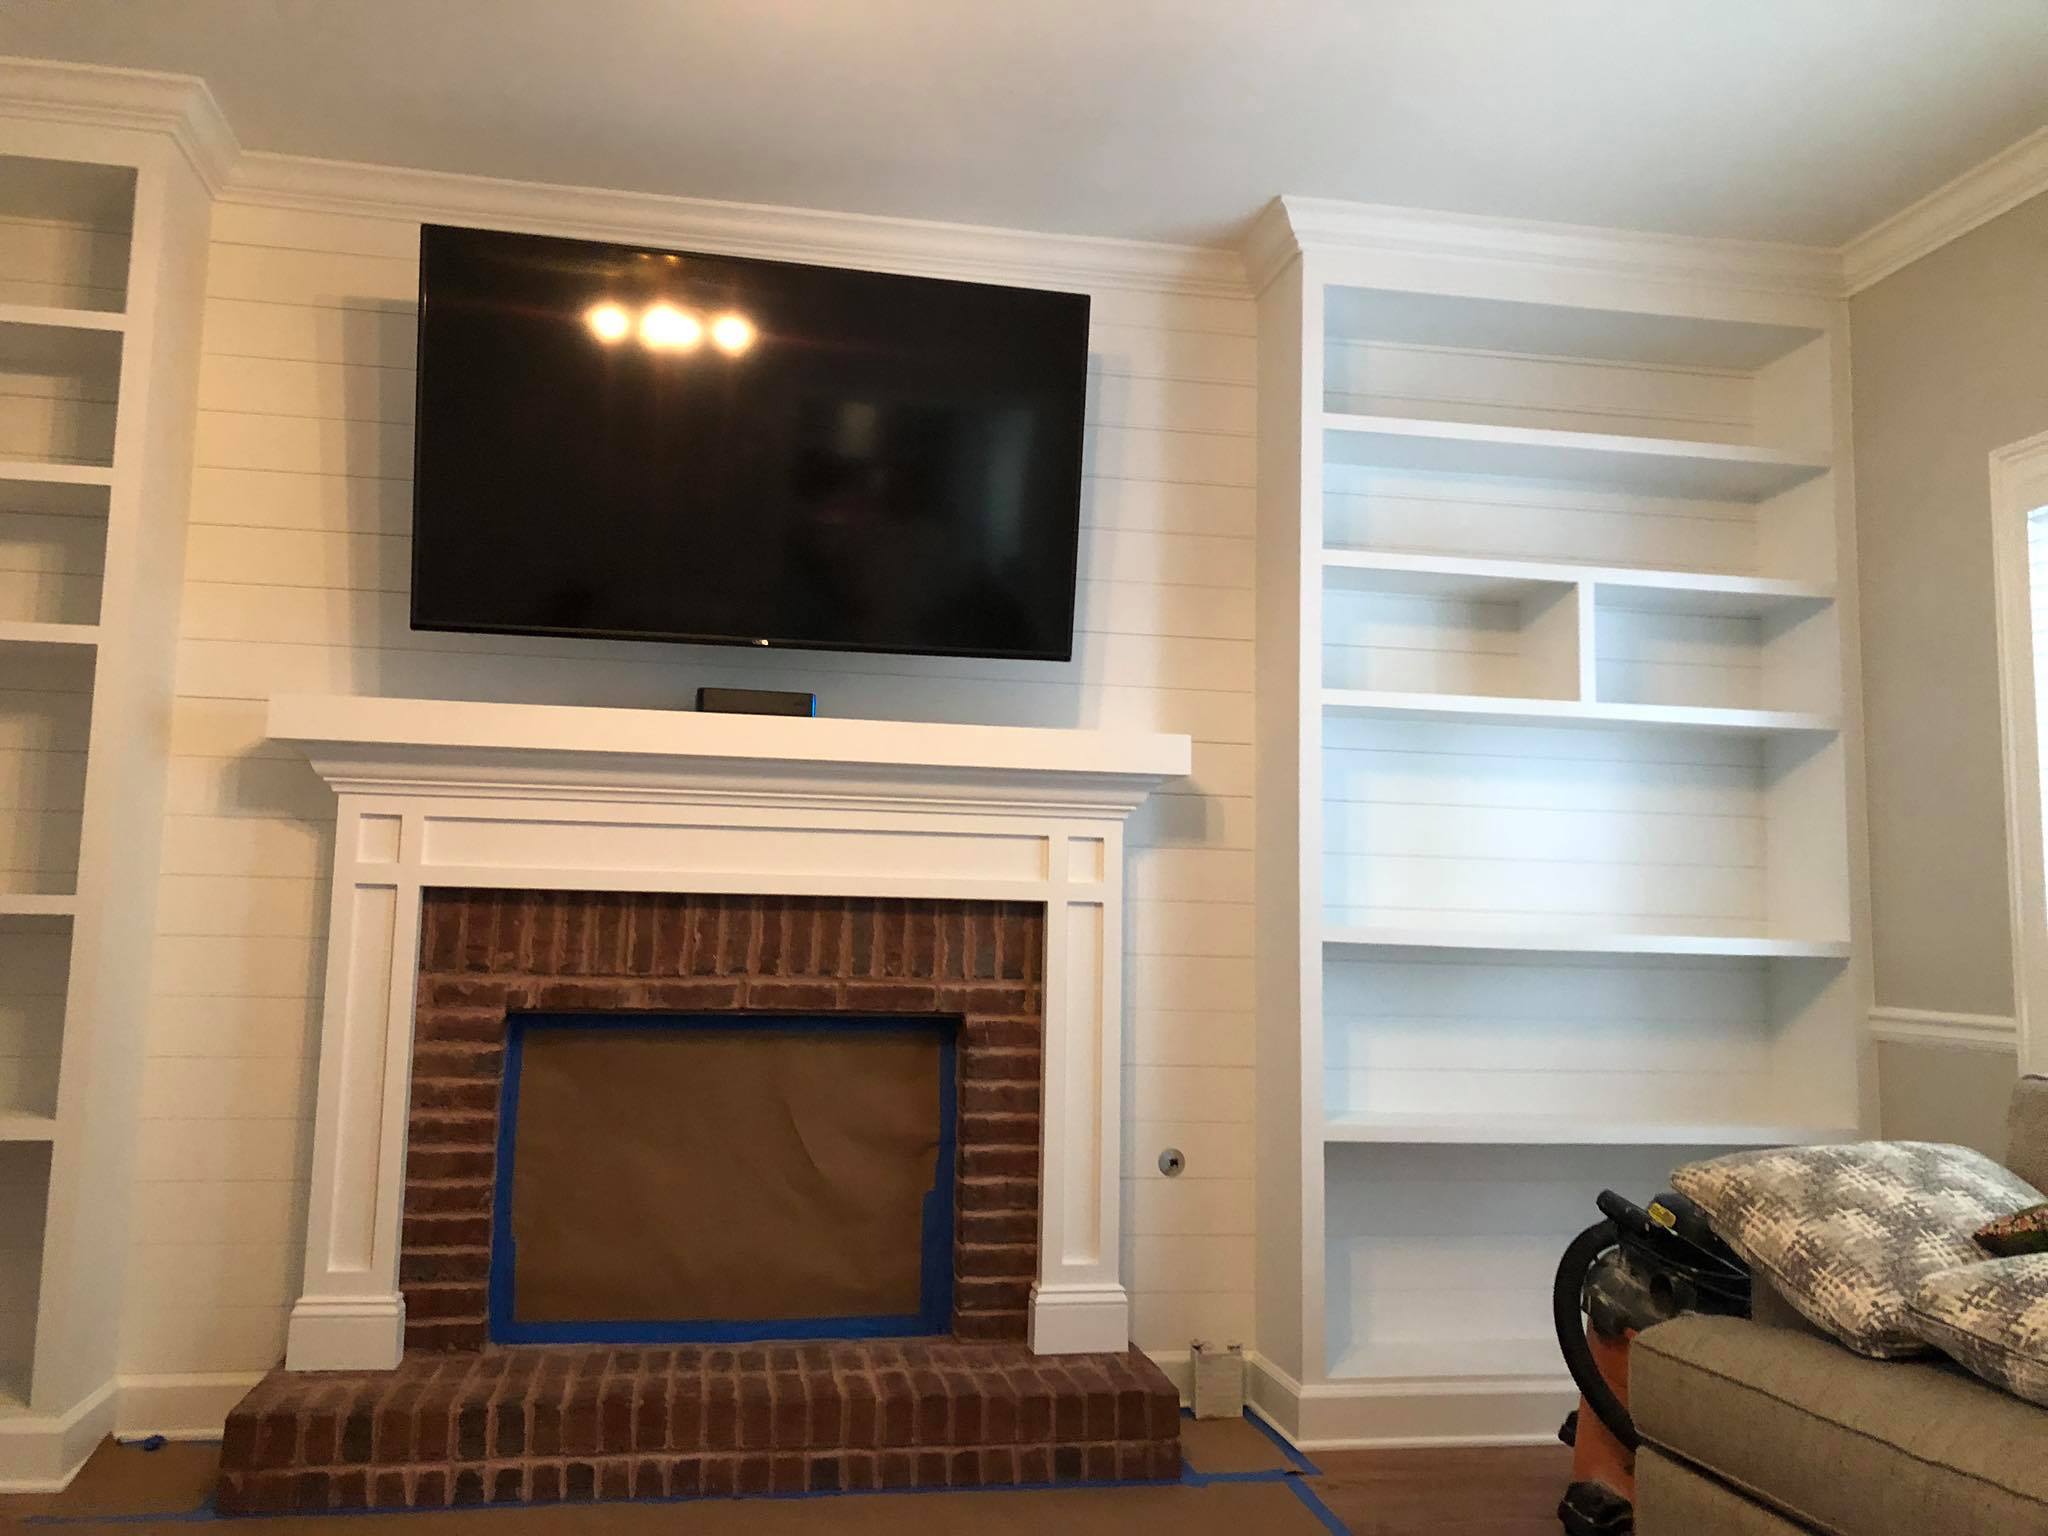 Fireplace Custom Wall High Built in Cabinets Shelves and Trim Painted White Installed 1